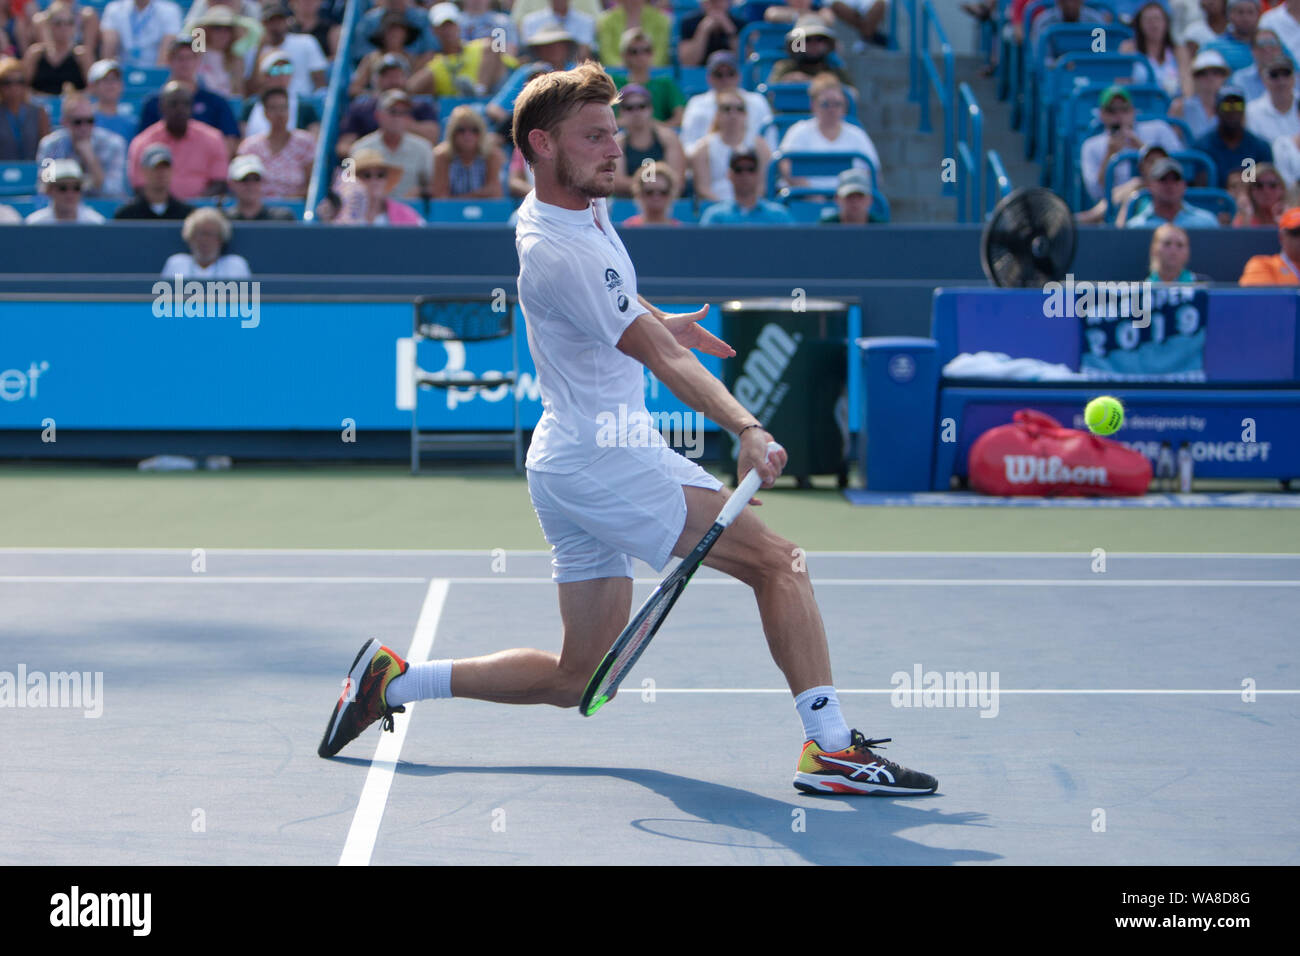 Cincinnati, OH, USA. 18th Aug, 2019. Western and Southern Open Tennis,  Cincinnati, OH; August 10-19, 2019. David Goffin in action against Daniil  Medvedev during the Western and Southern Open Tennis tournament played